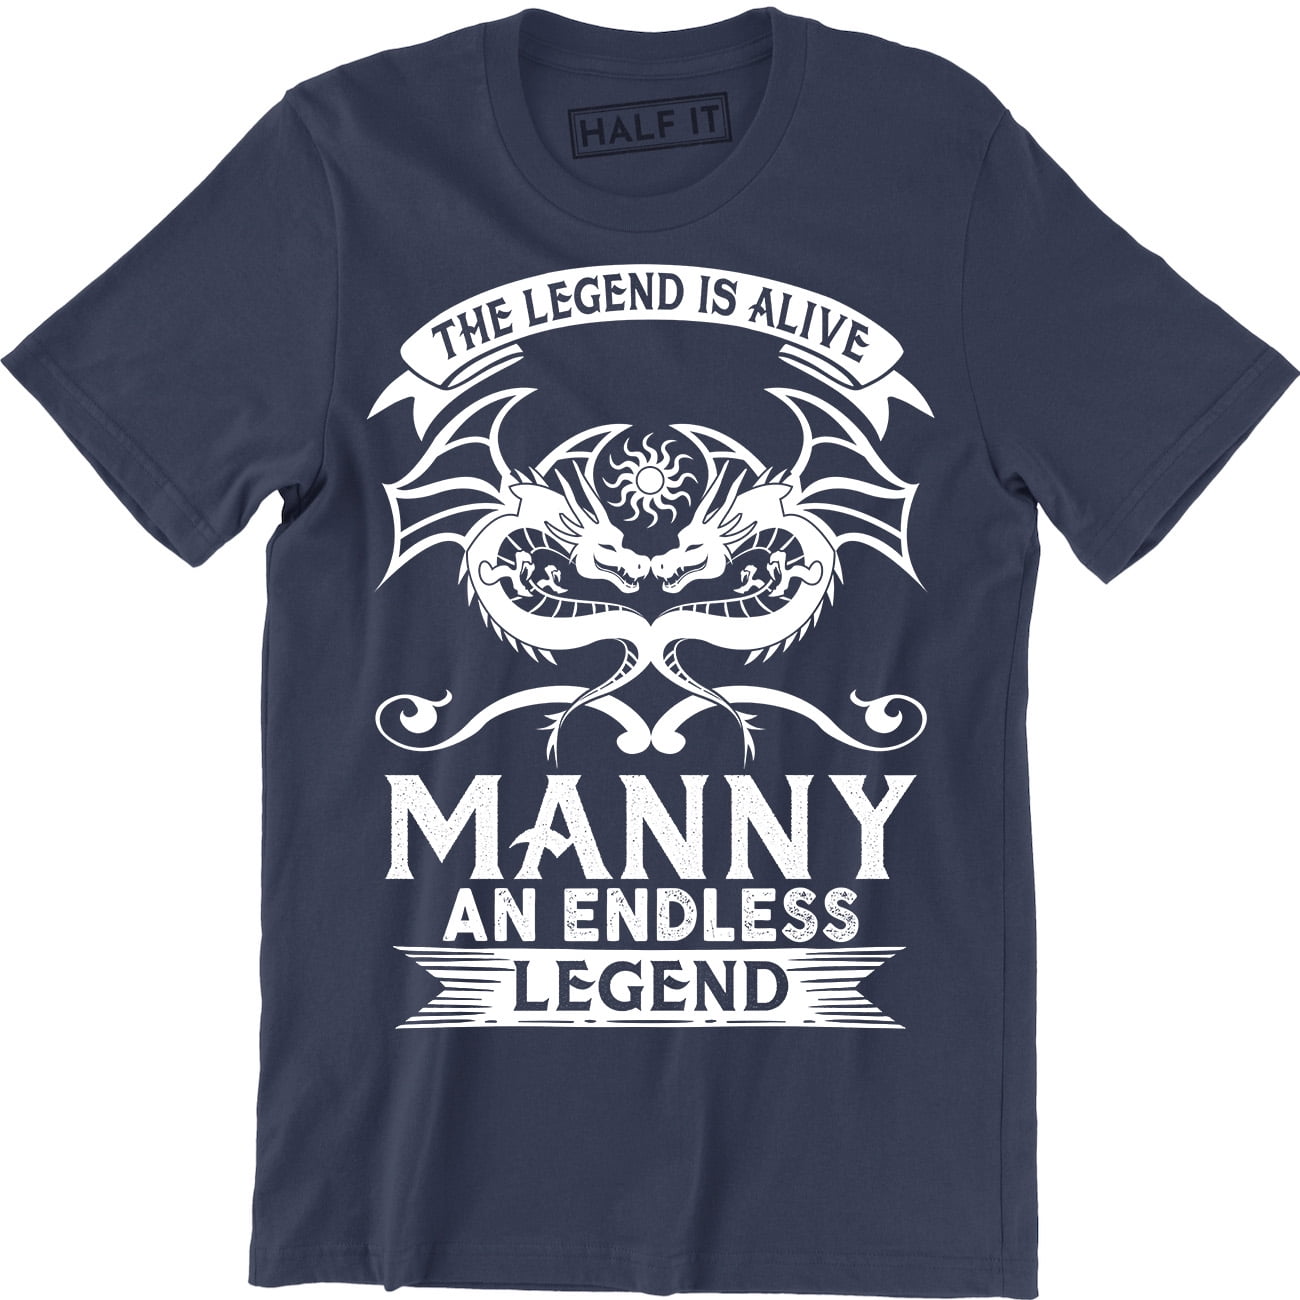 PERSONALISED SURNAME T-SHIRT THE LEGEND IS ALIVE AN ENDLESS LEGEND YOUR SURNAME 